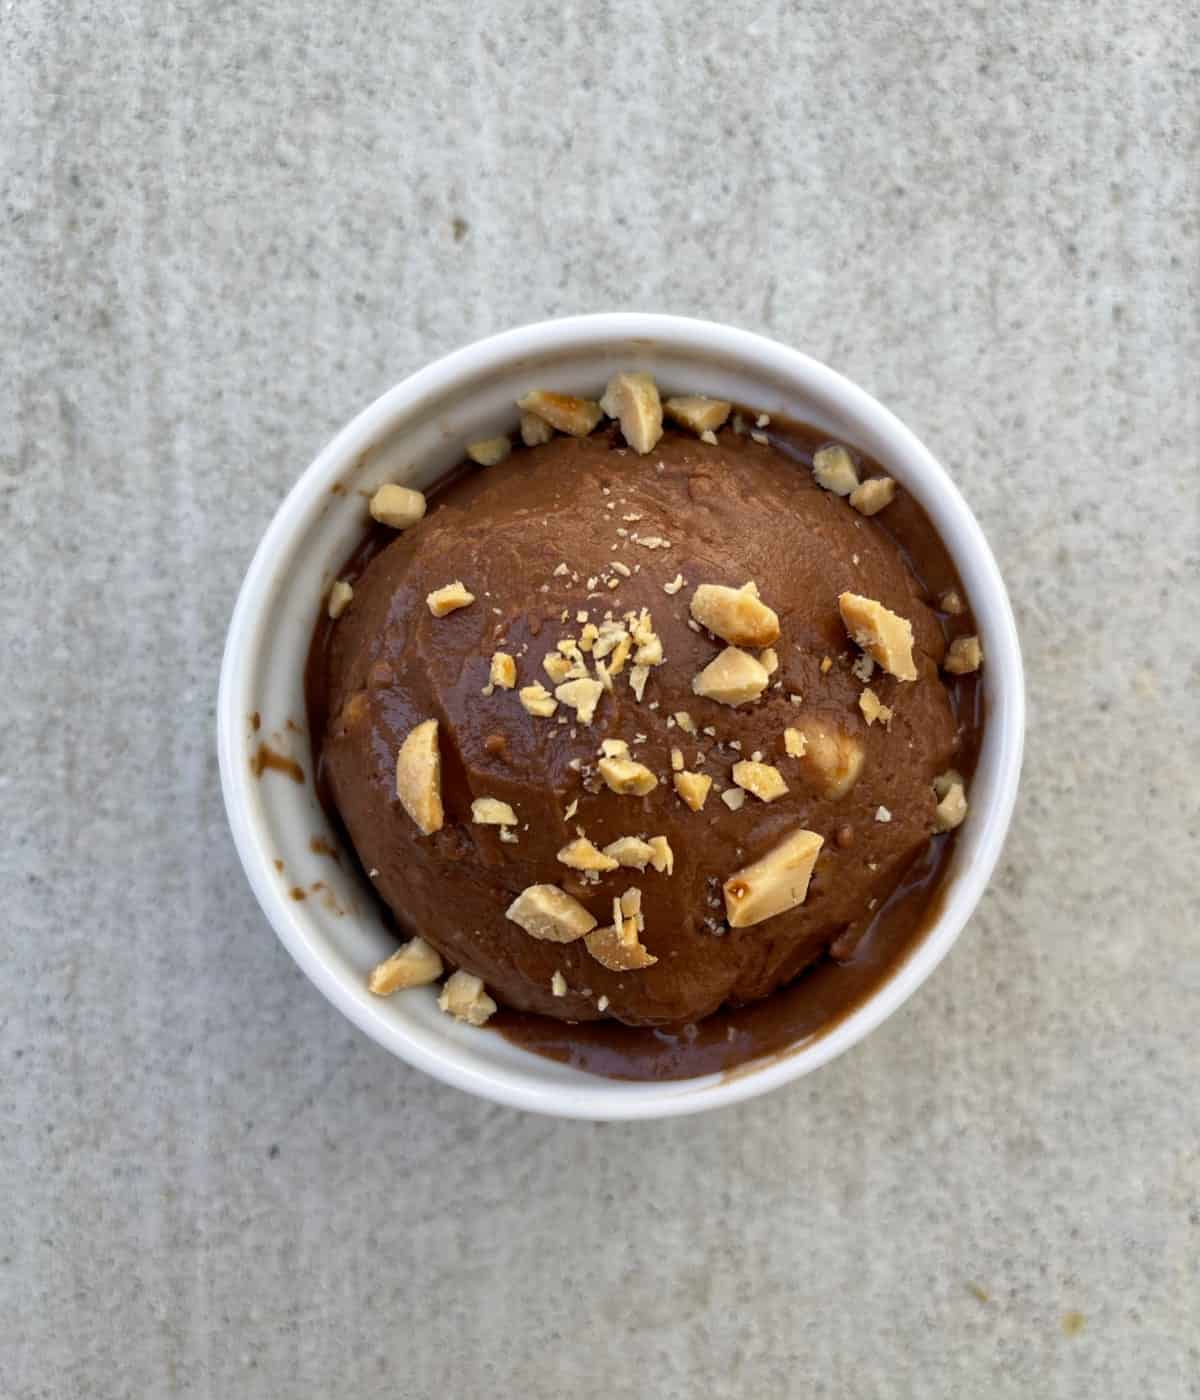 Peanut butter chocolate nice cream in white dish topped with chopped peanuts.